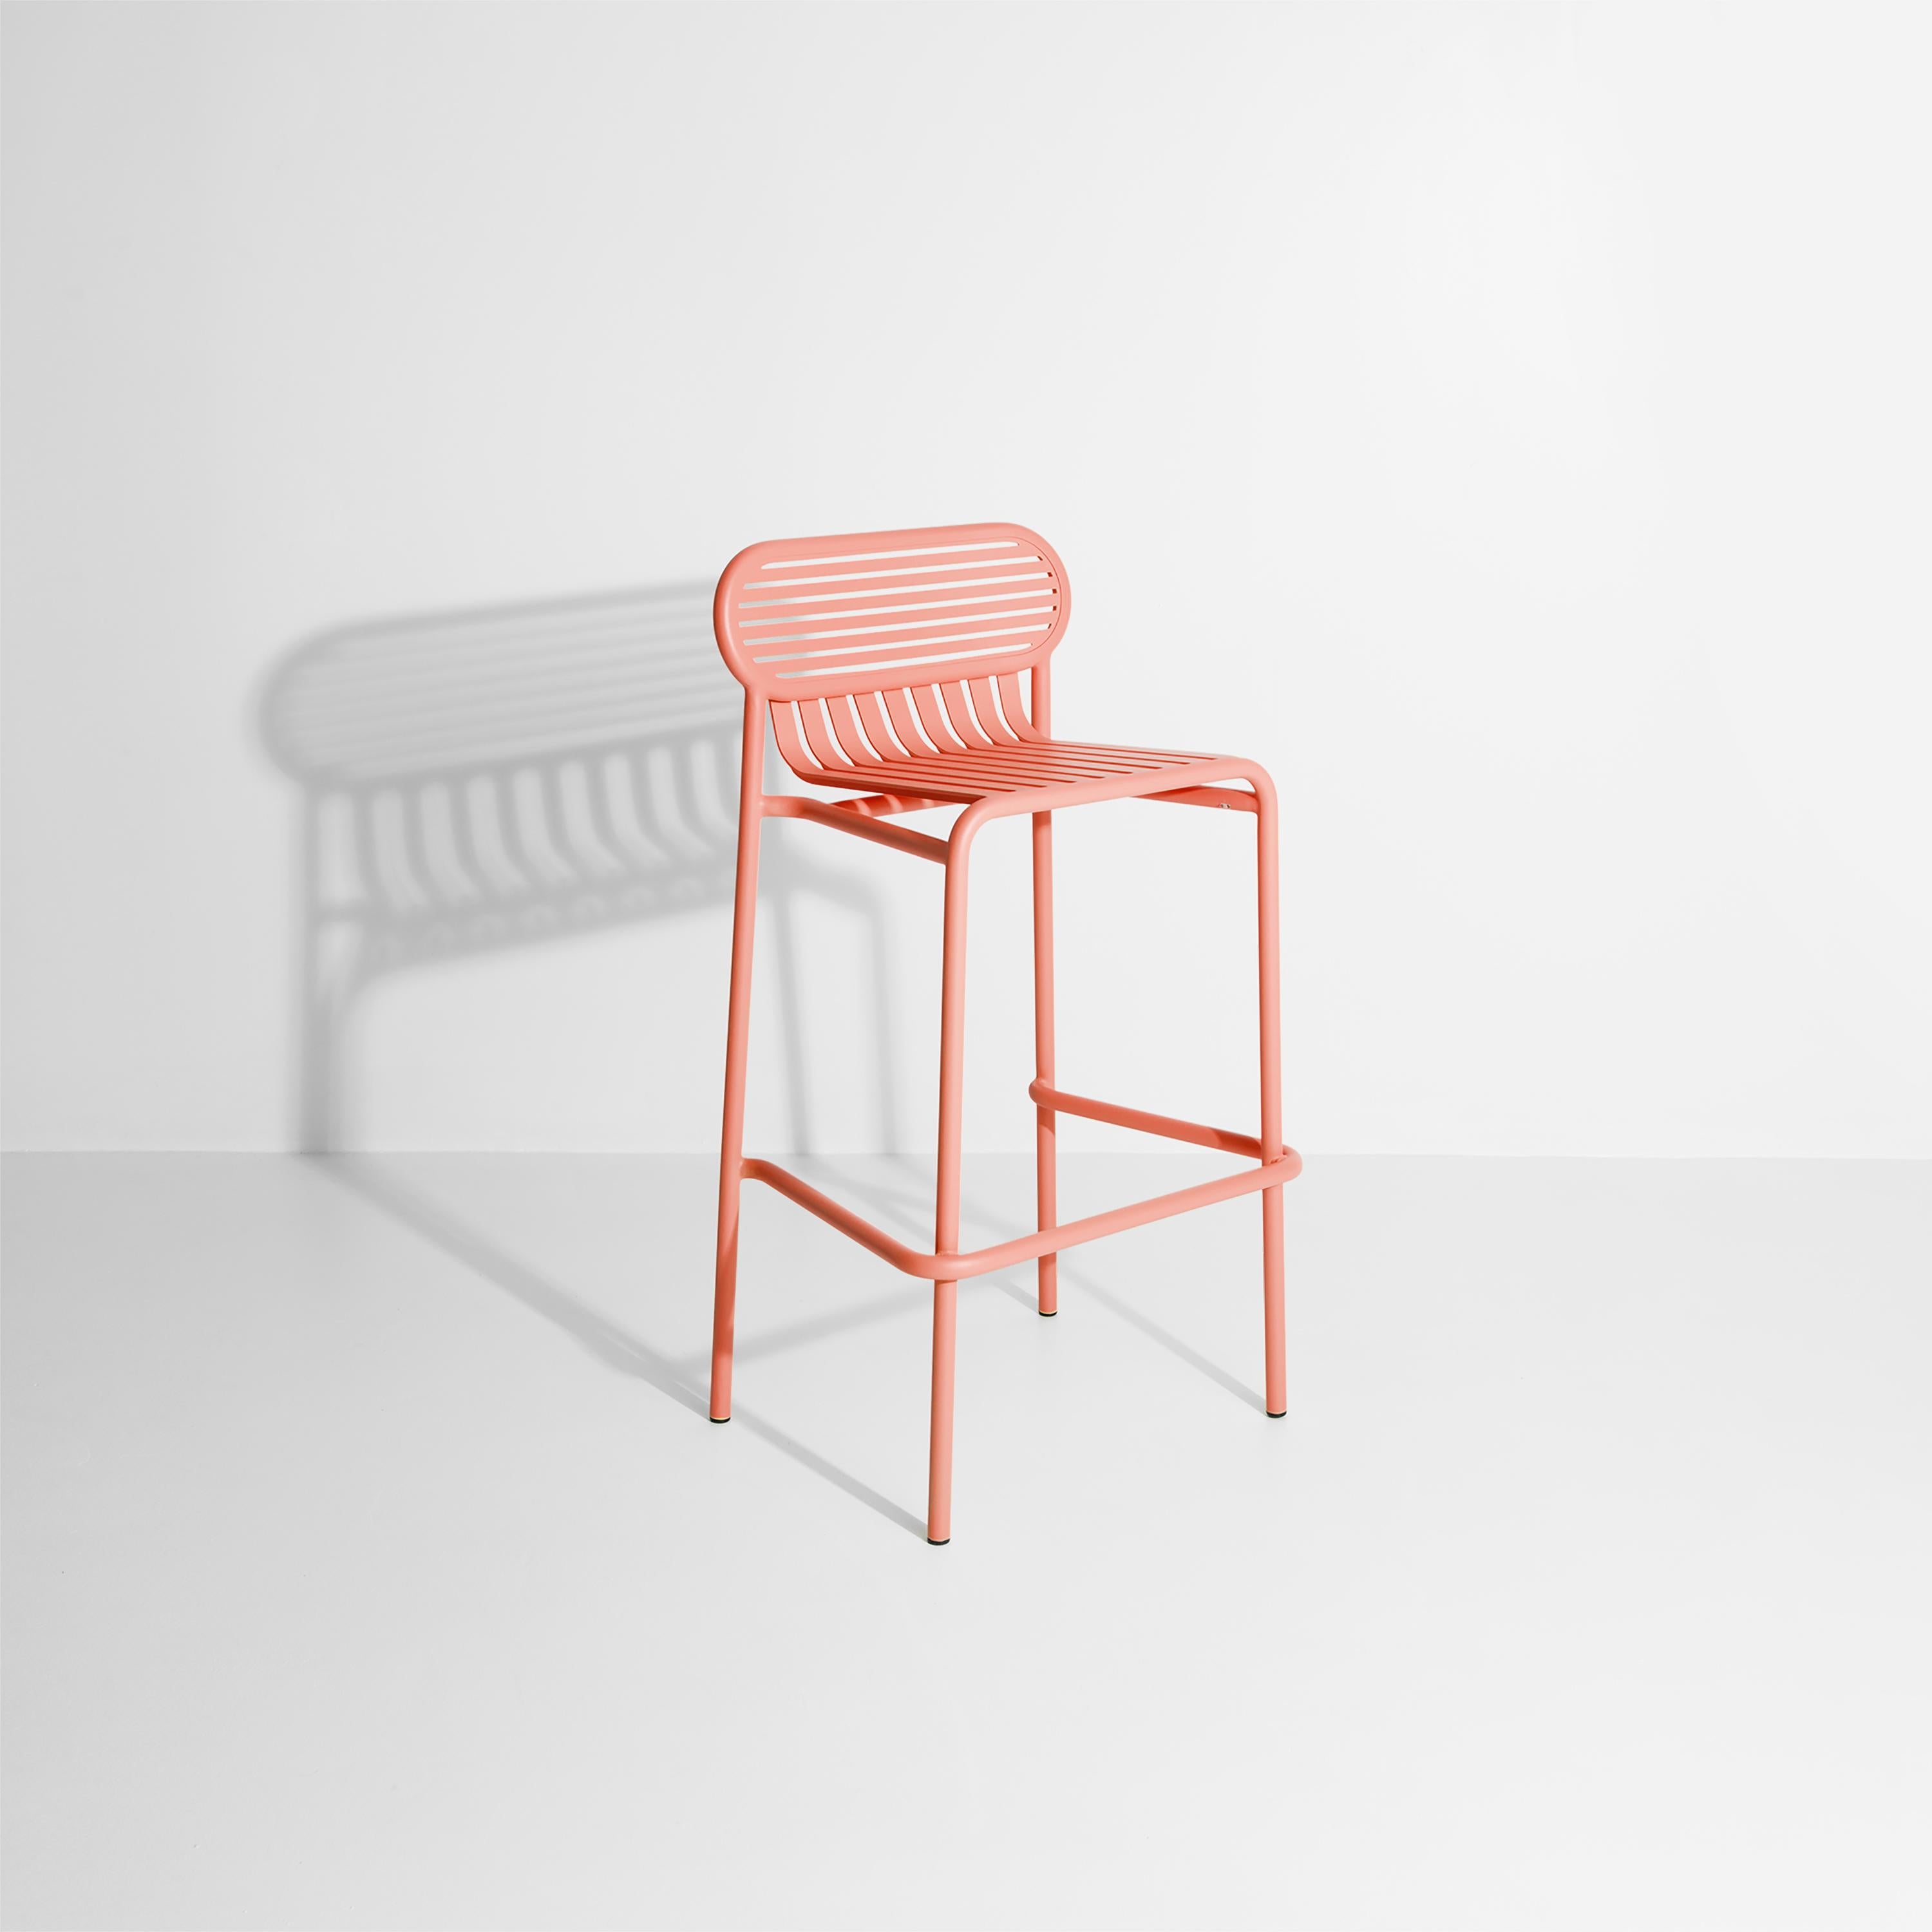 Petite Friture Week-End Bar Stool in Coral Aluminium by Studio BrichetZiegler, 2017

The week-end collection is a full range of outdoor furniture, in aluminium grained epoxy paint, matt finish, that includes 18 functions and 8 colours for the